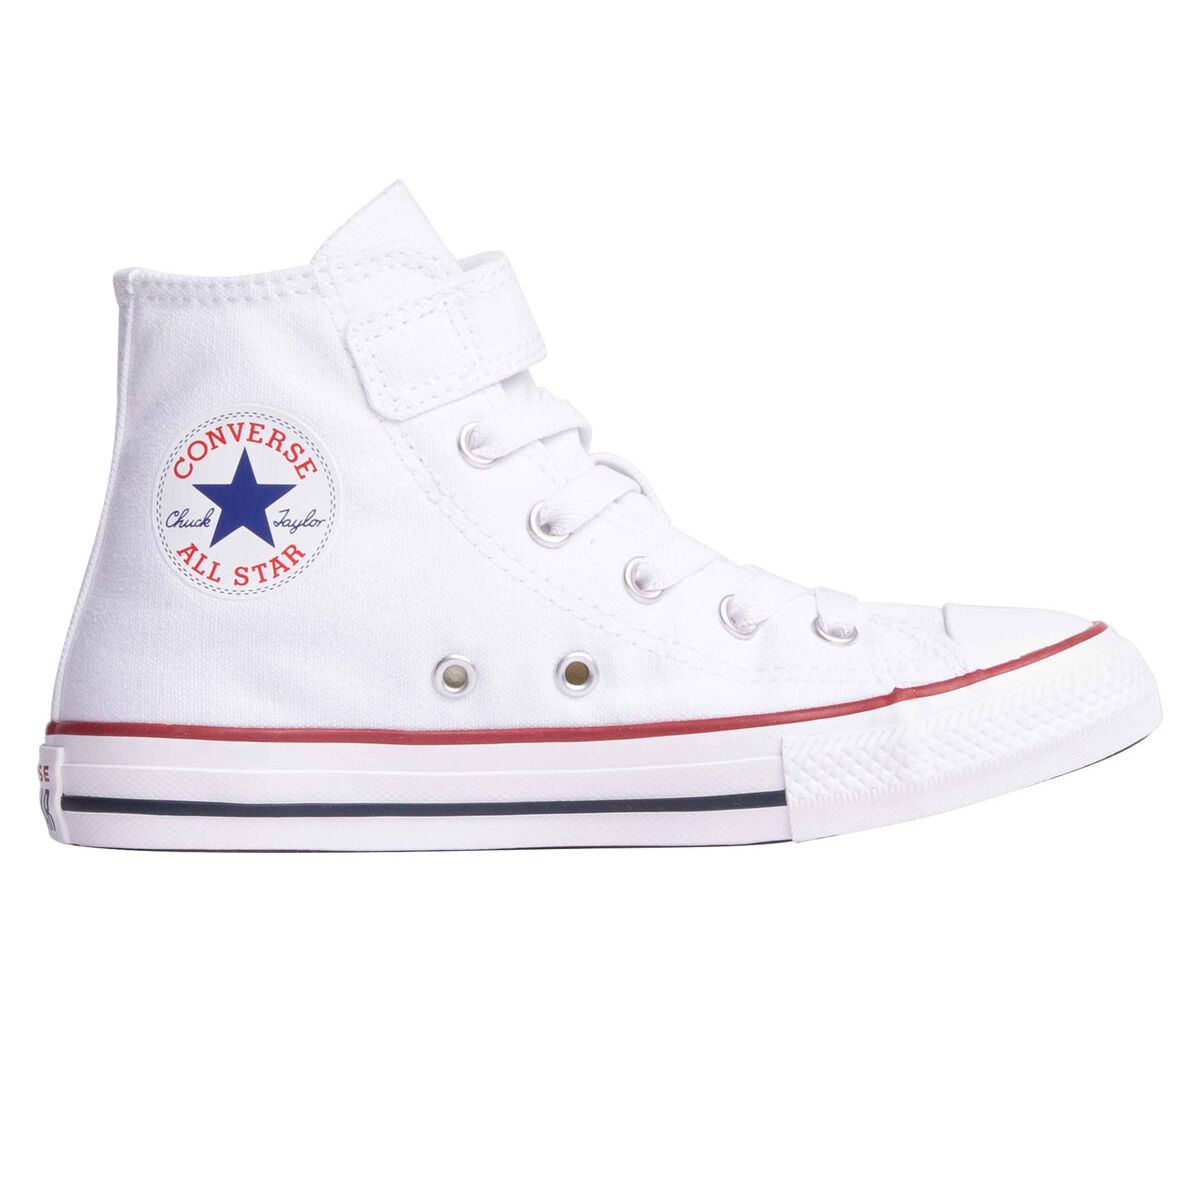 chuck taylor sneakers near me